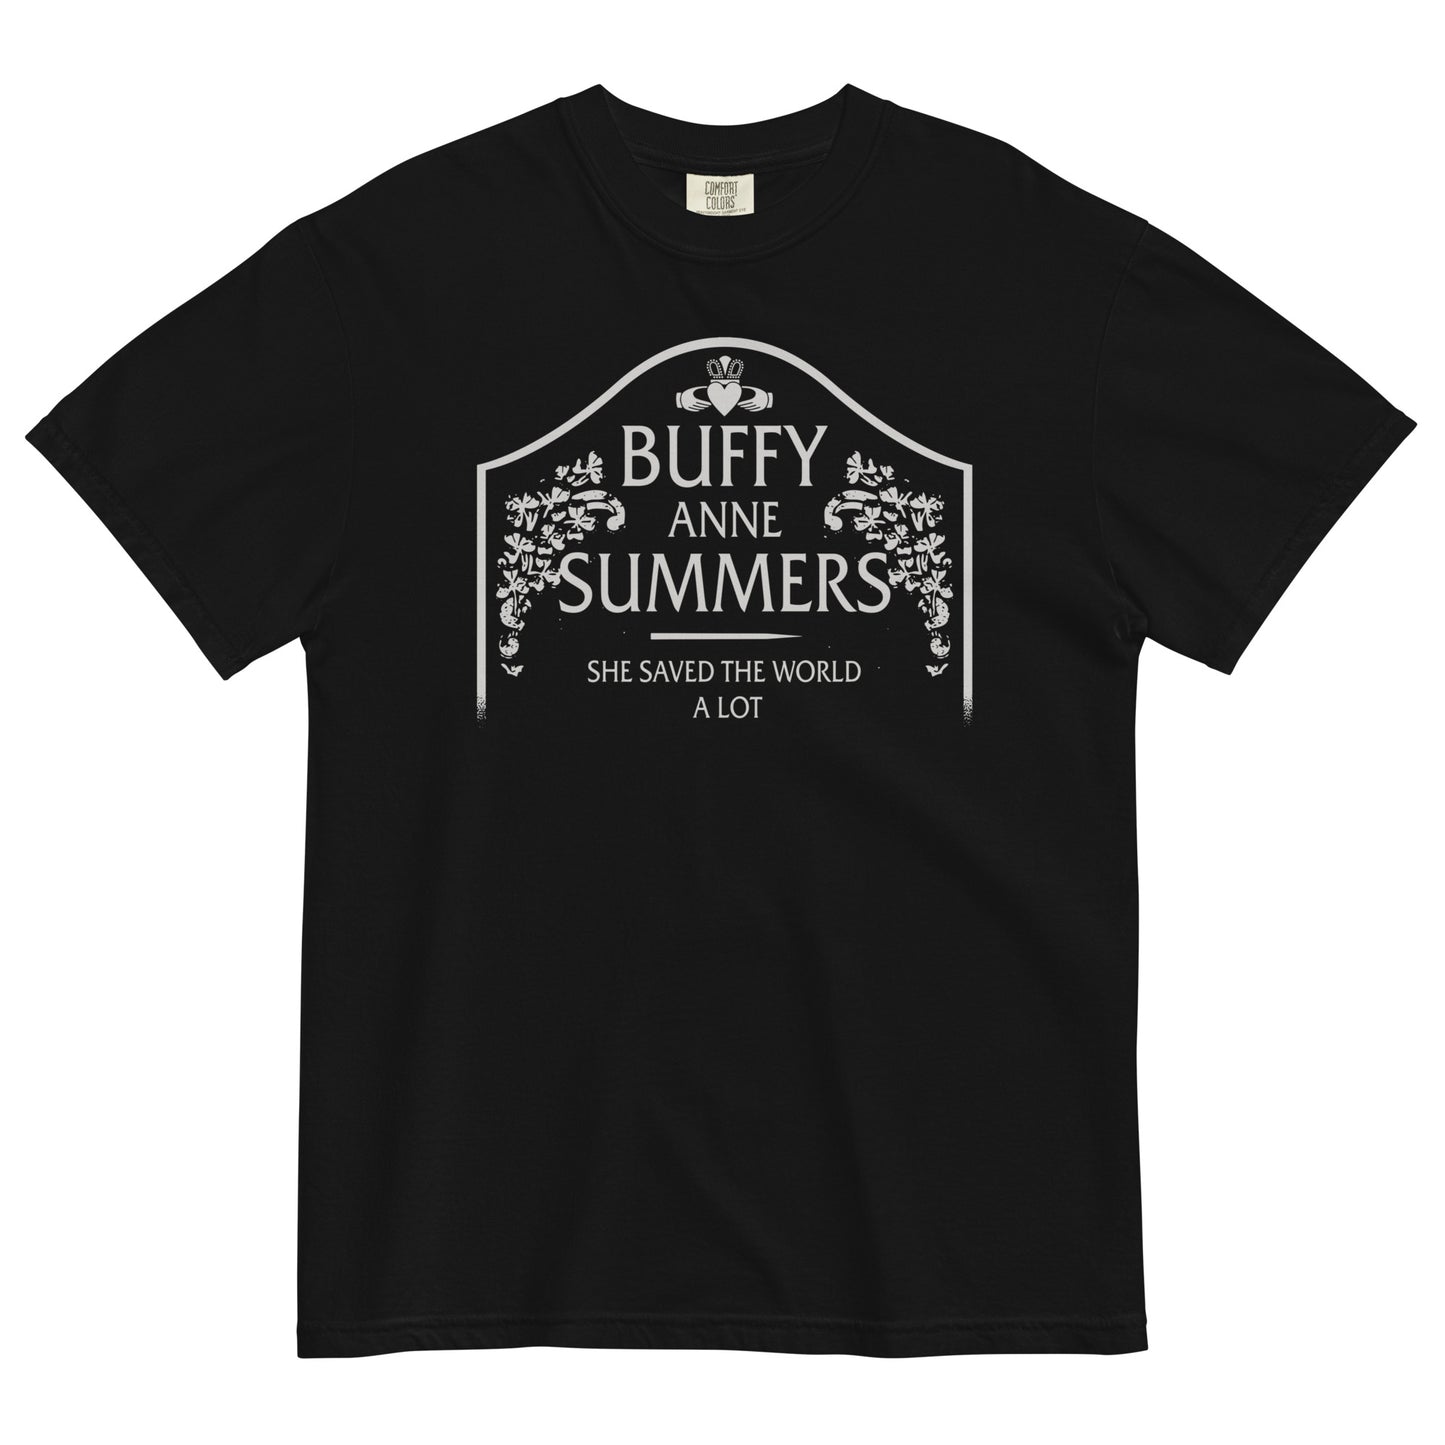 Buffy Anne Summers Men's Relaxed Fit Tee